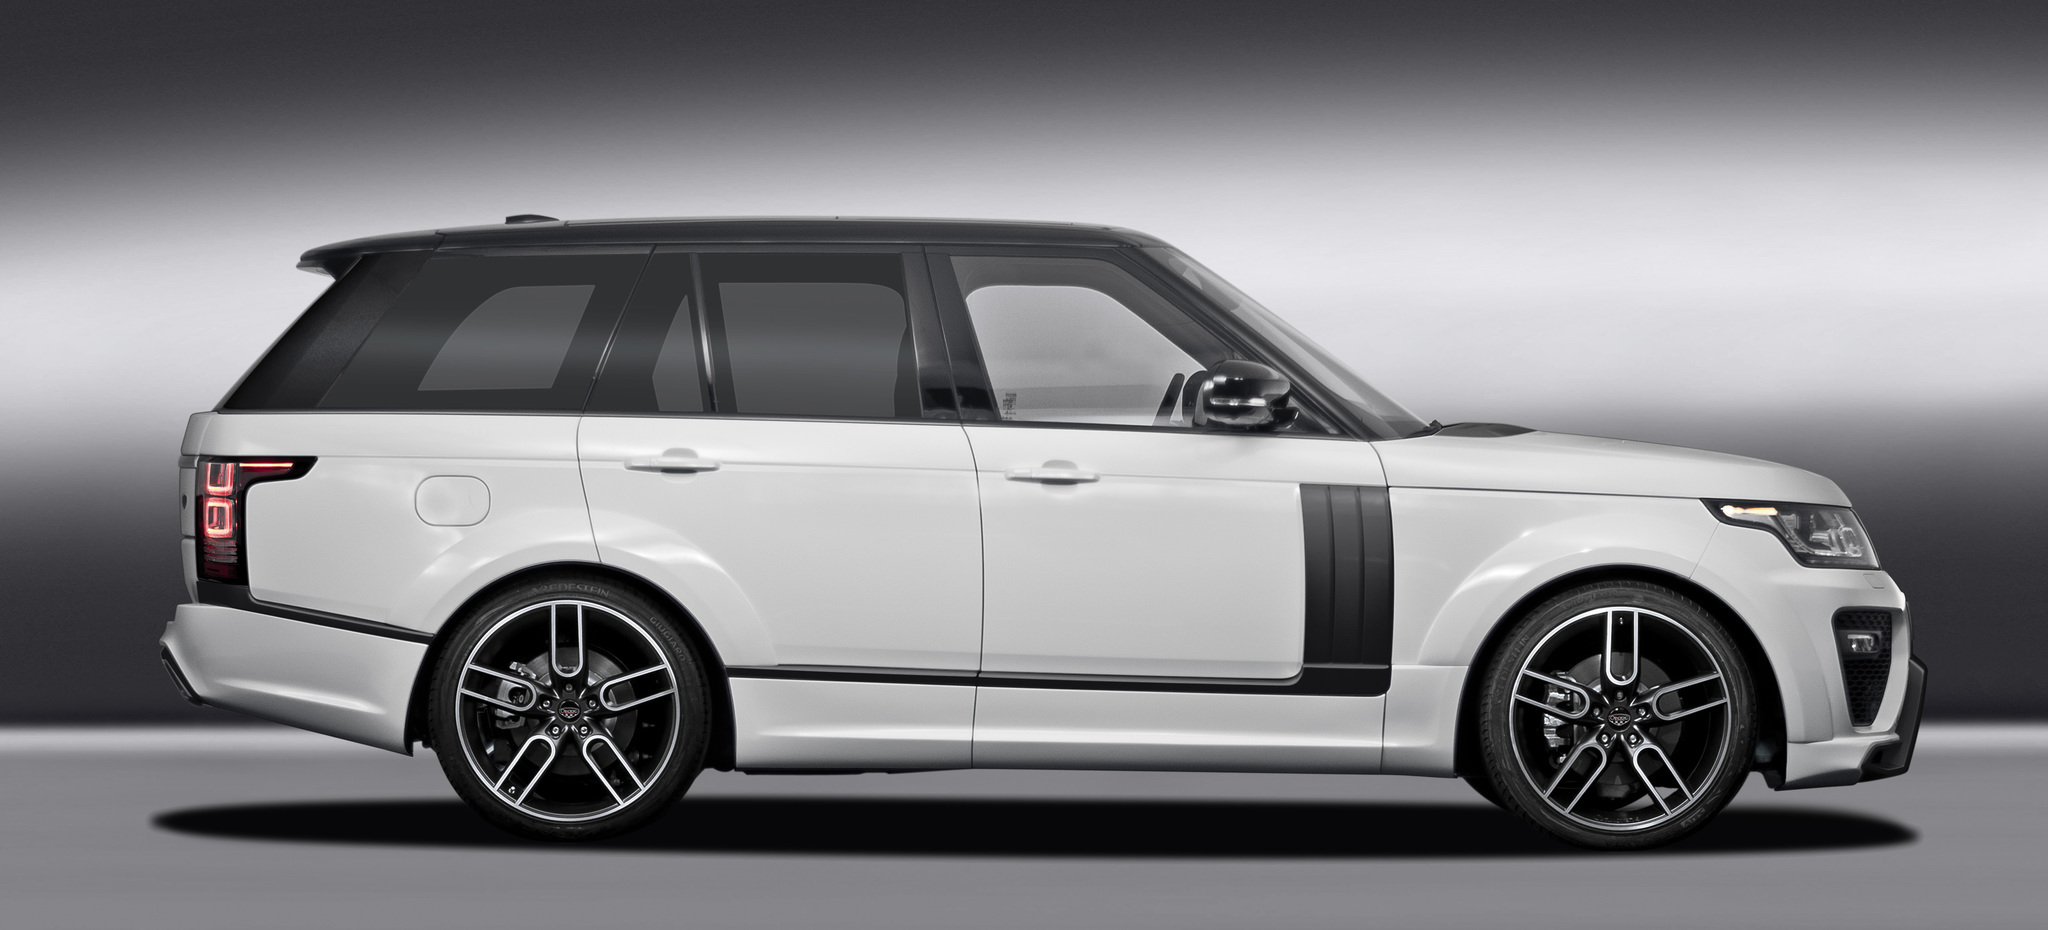 images-products-1-7454-232987934-2016_Land_Rover_Range_Rover_Vogue_SDV8_by_Caractère_002_5277.jpg